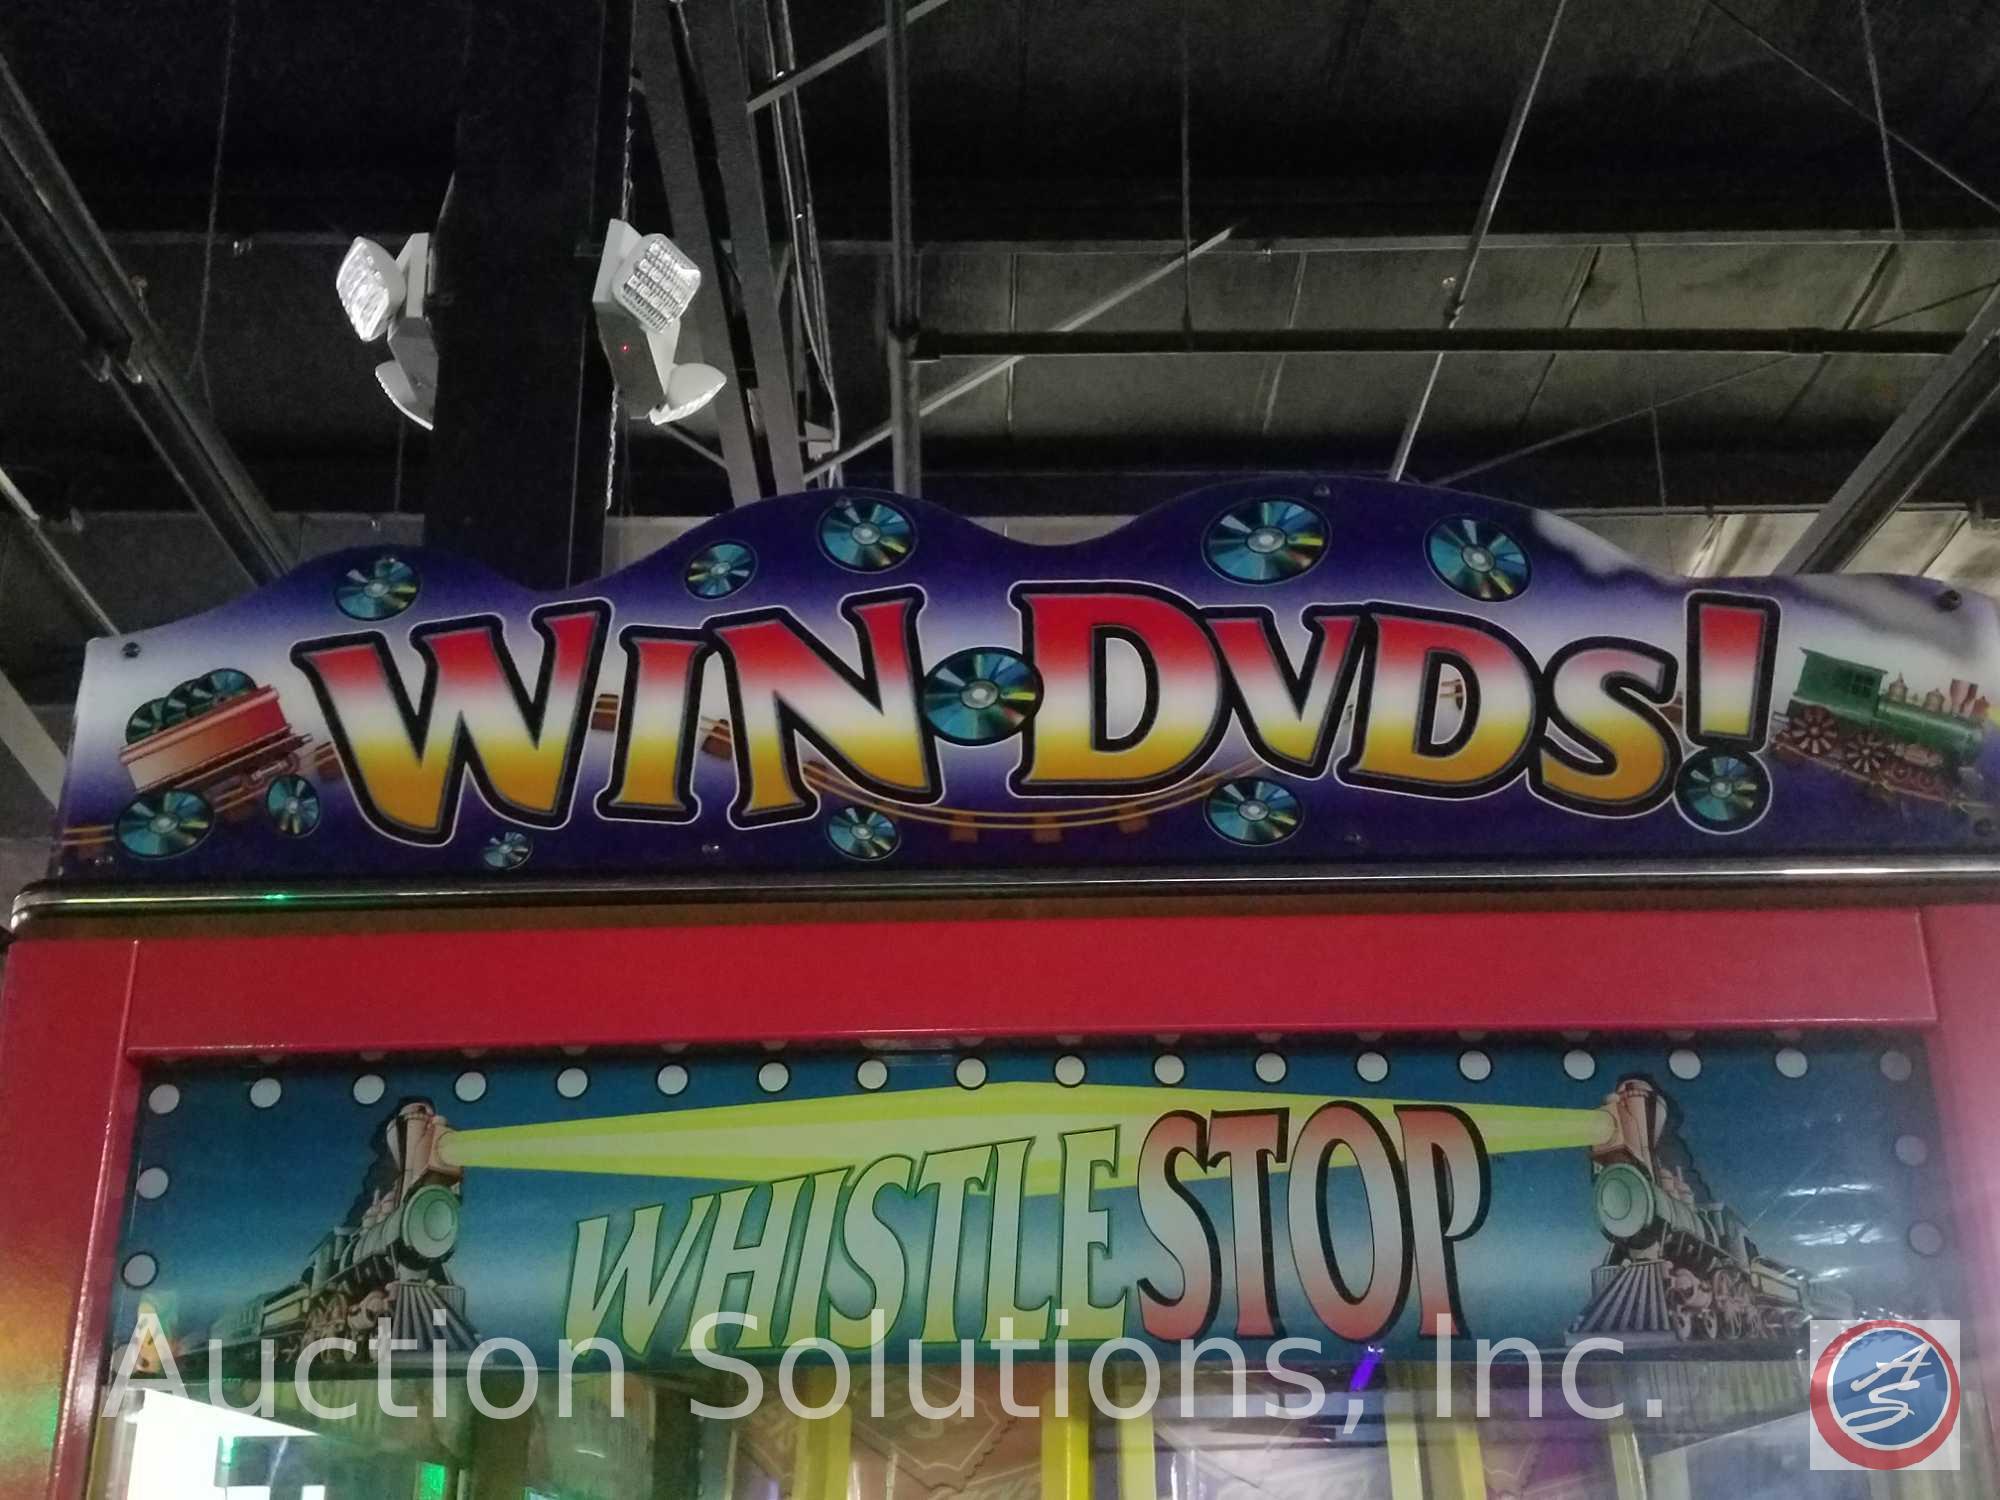 Whistle Stop DVD Prize Arcade Game with Intercard Reader {{NO MODEL OR SERIAL NO. LISTED}} {{SOME